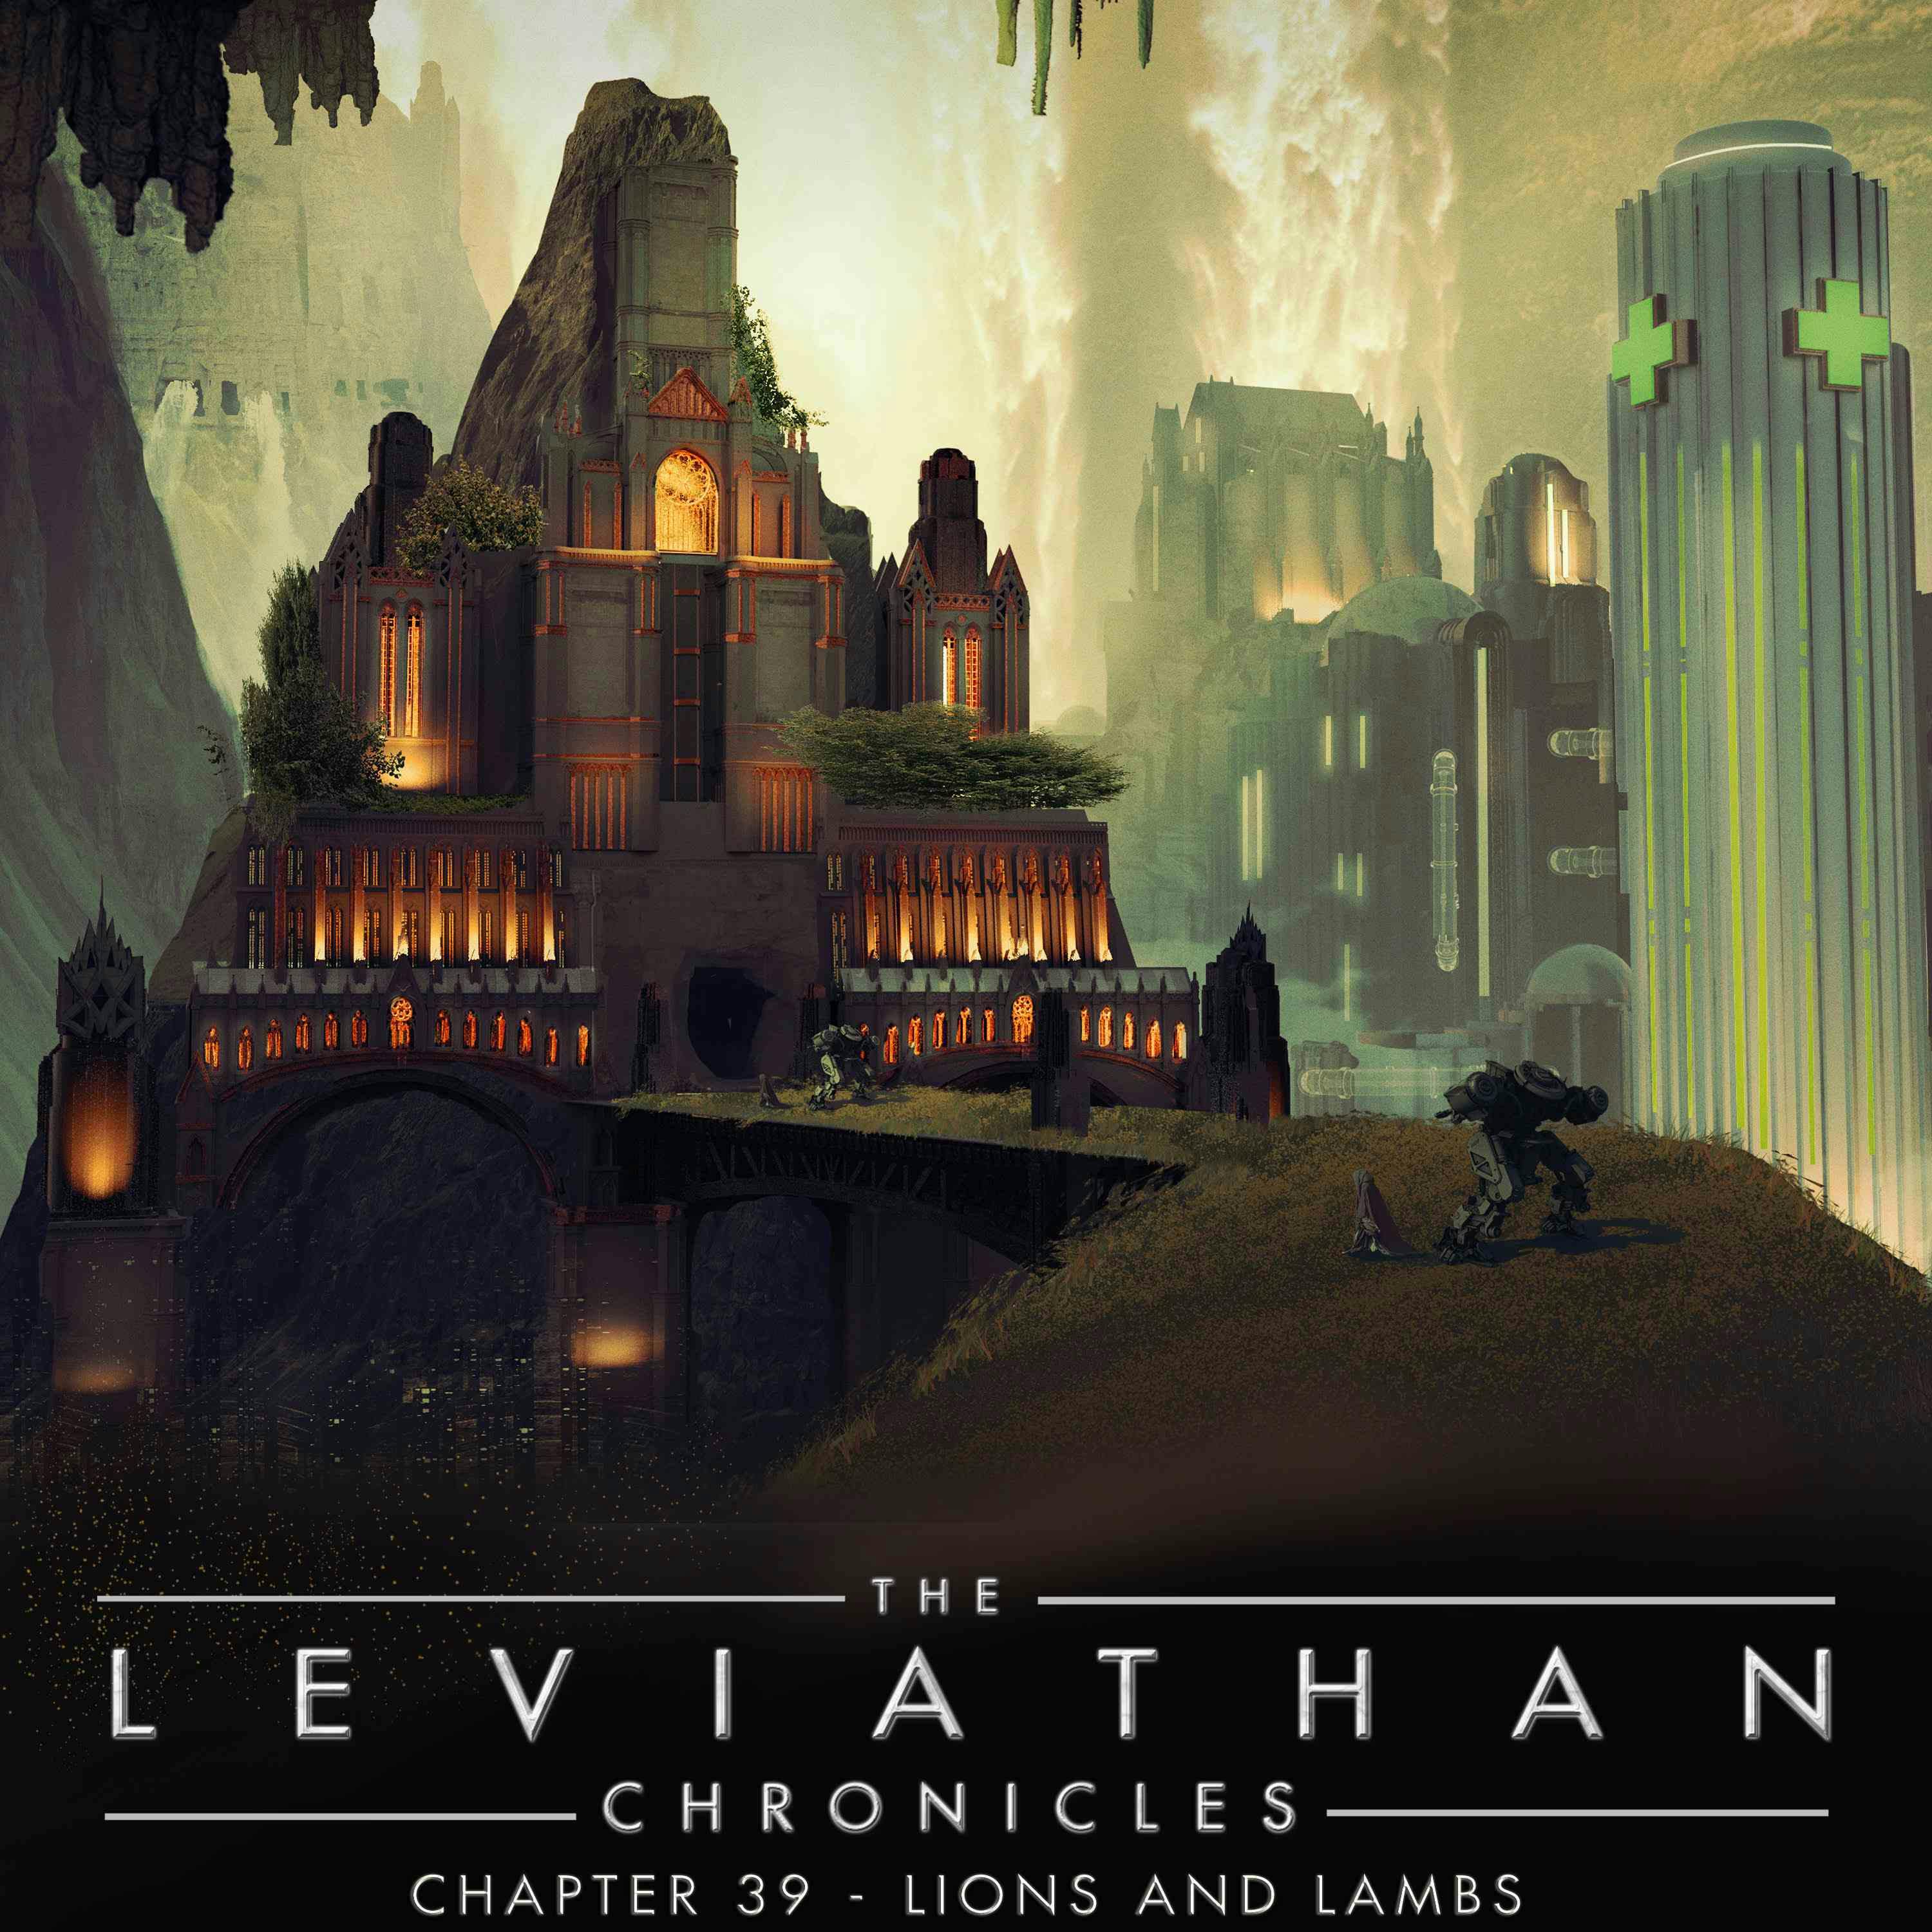 The Leviathan Chronicles | Chapter 39 - Lions and Lambs